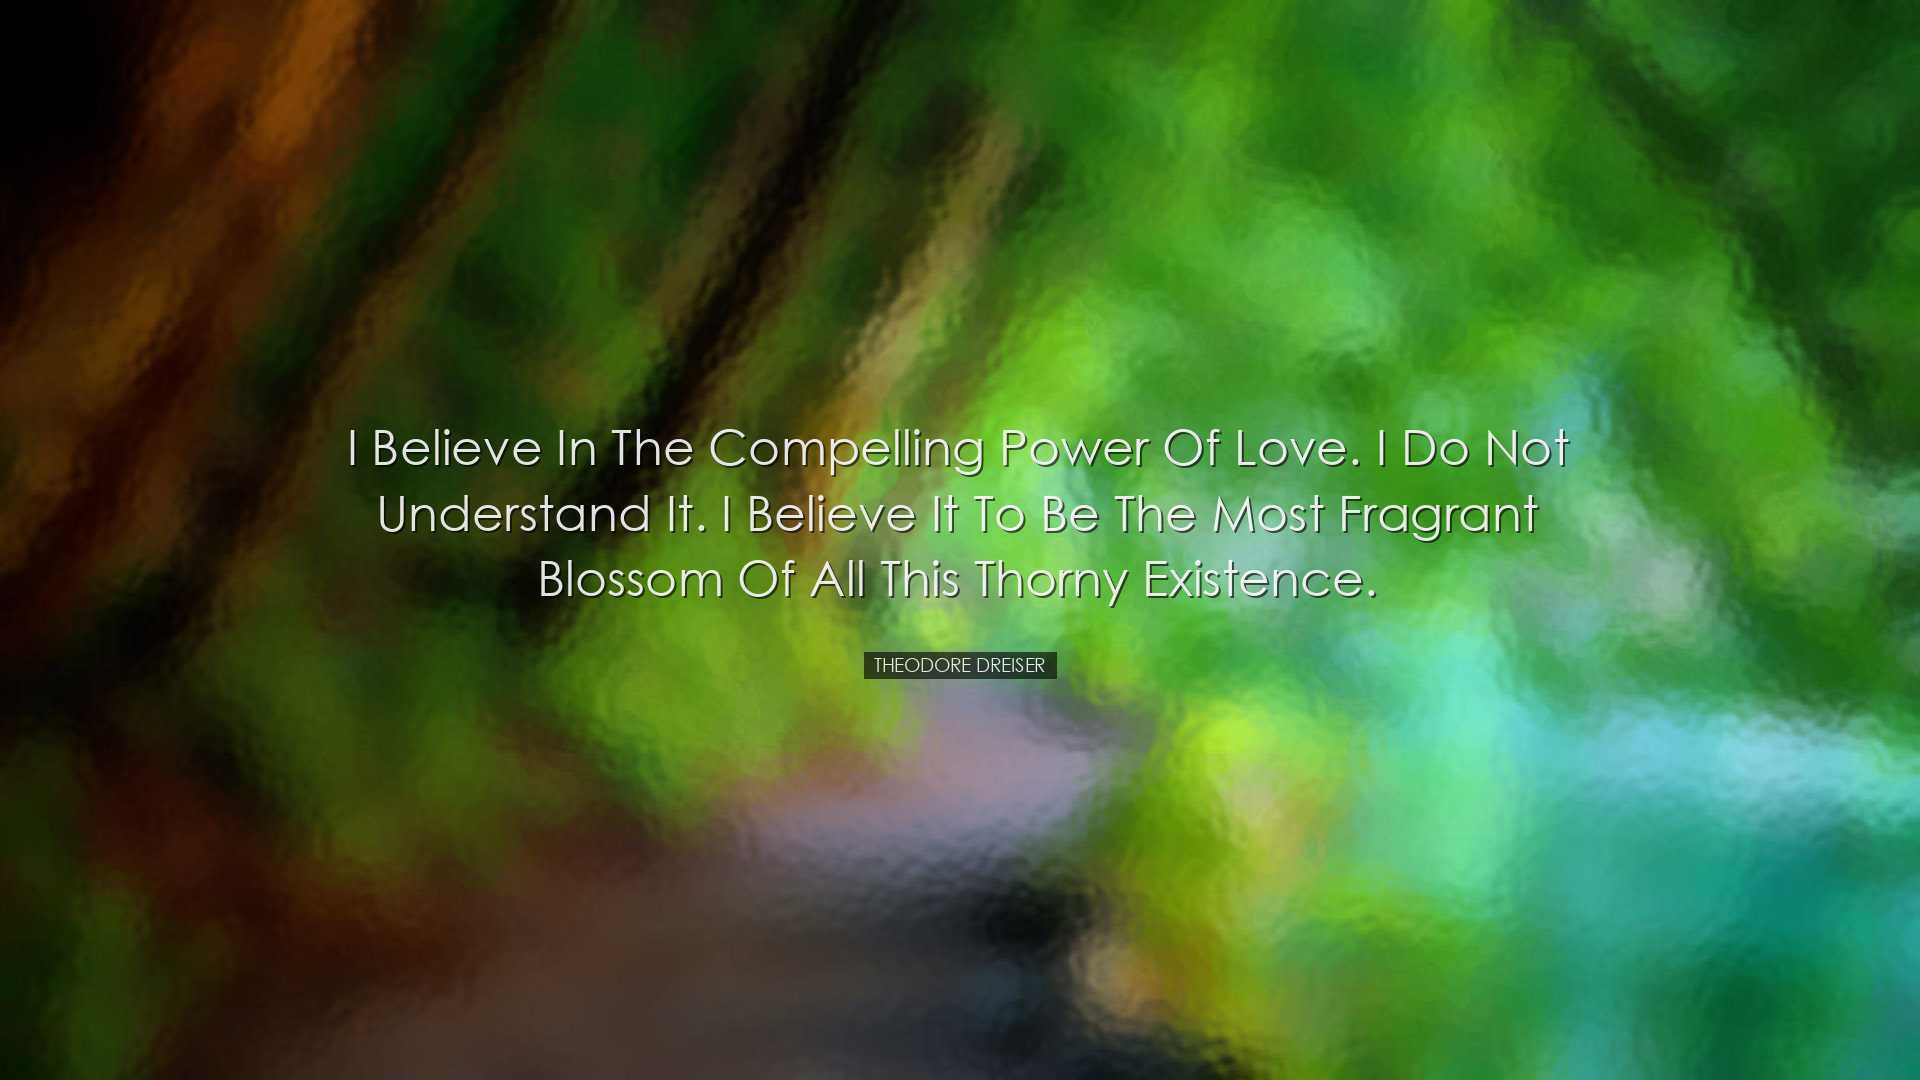 I believe in the compelling power of love. I do not understand it.